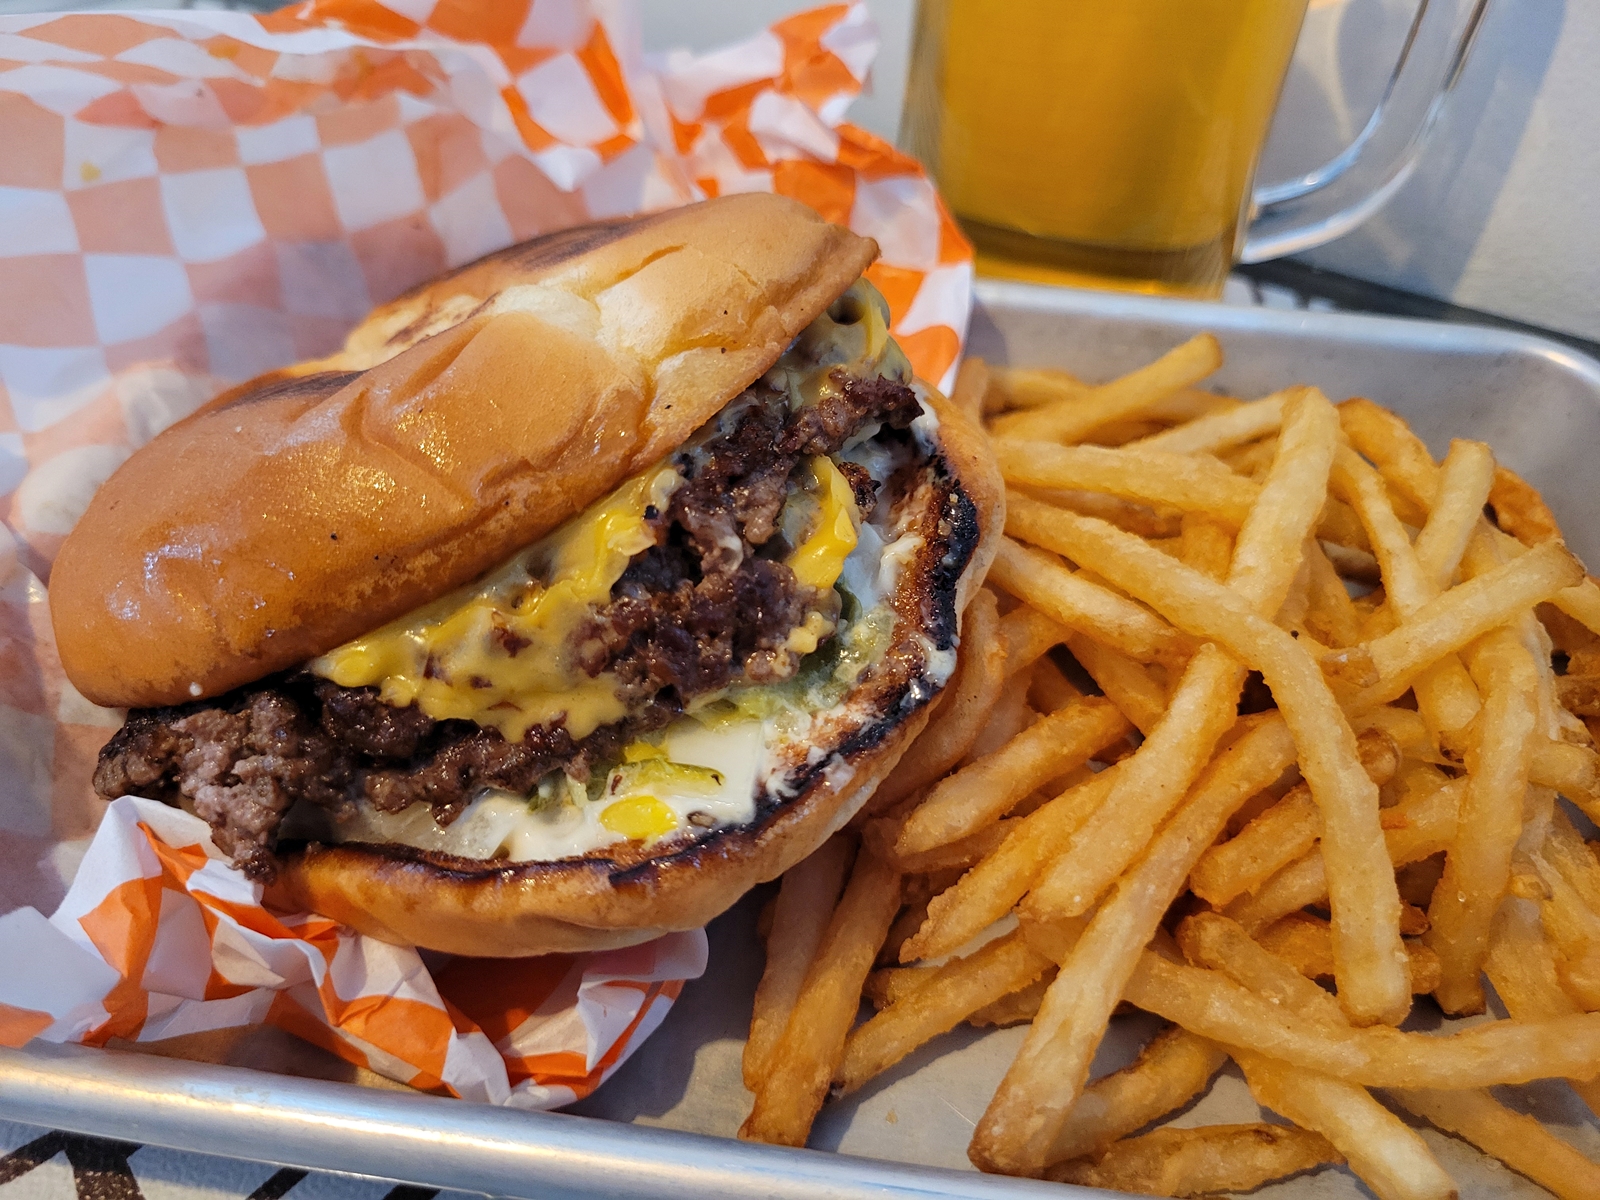 A burger in orange and white checkered paper with fries on a metal pan.